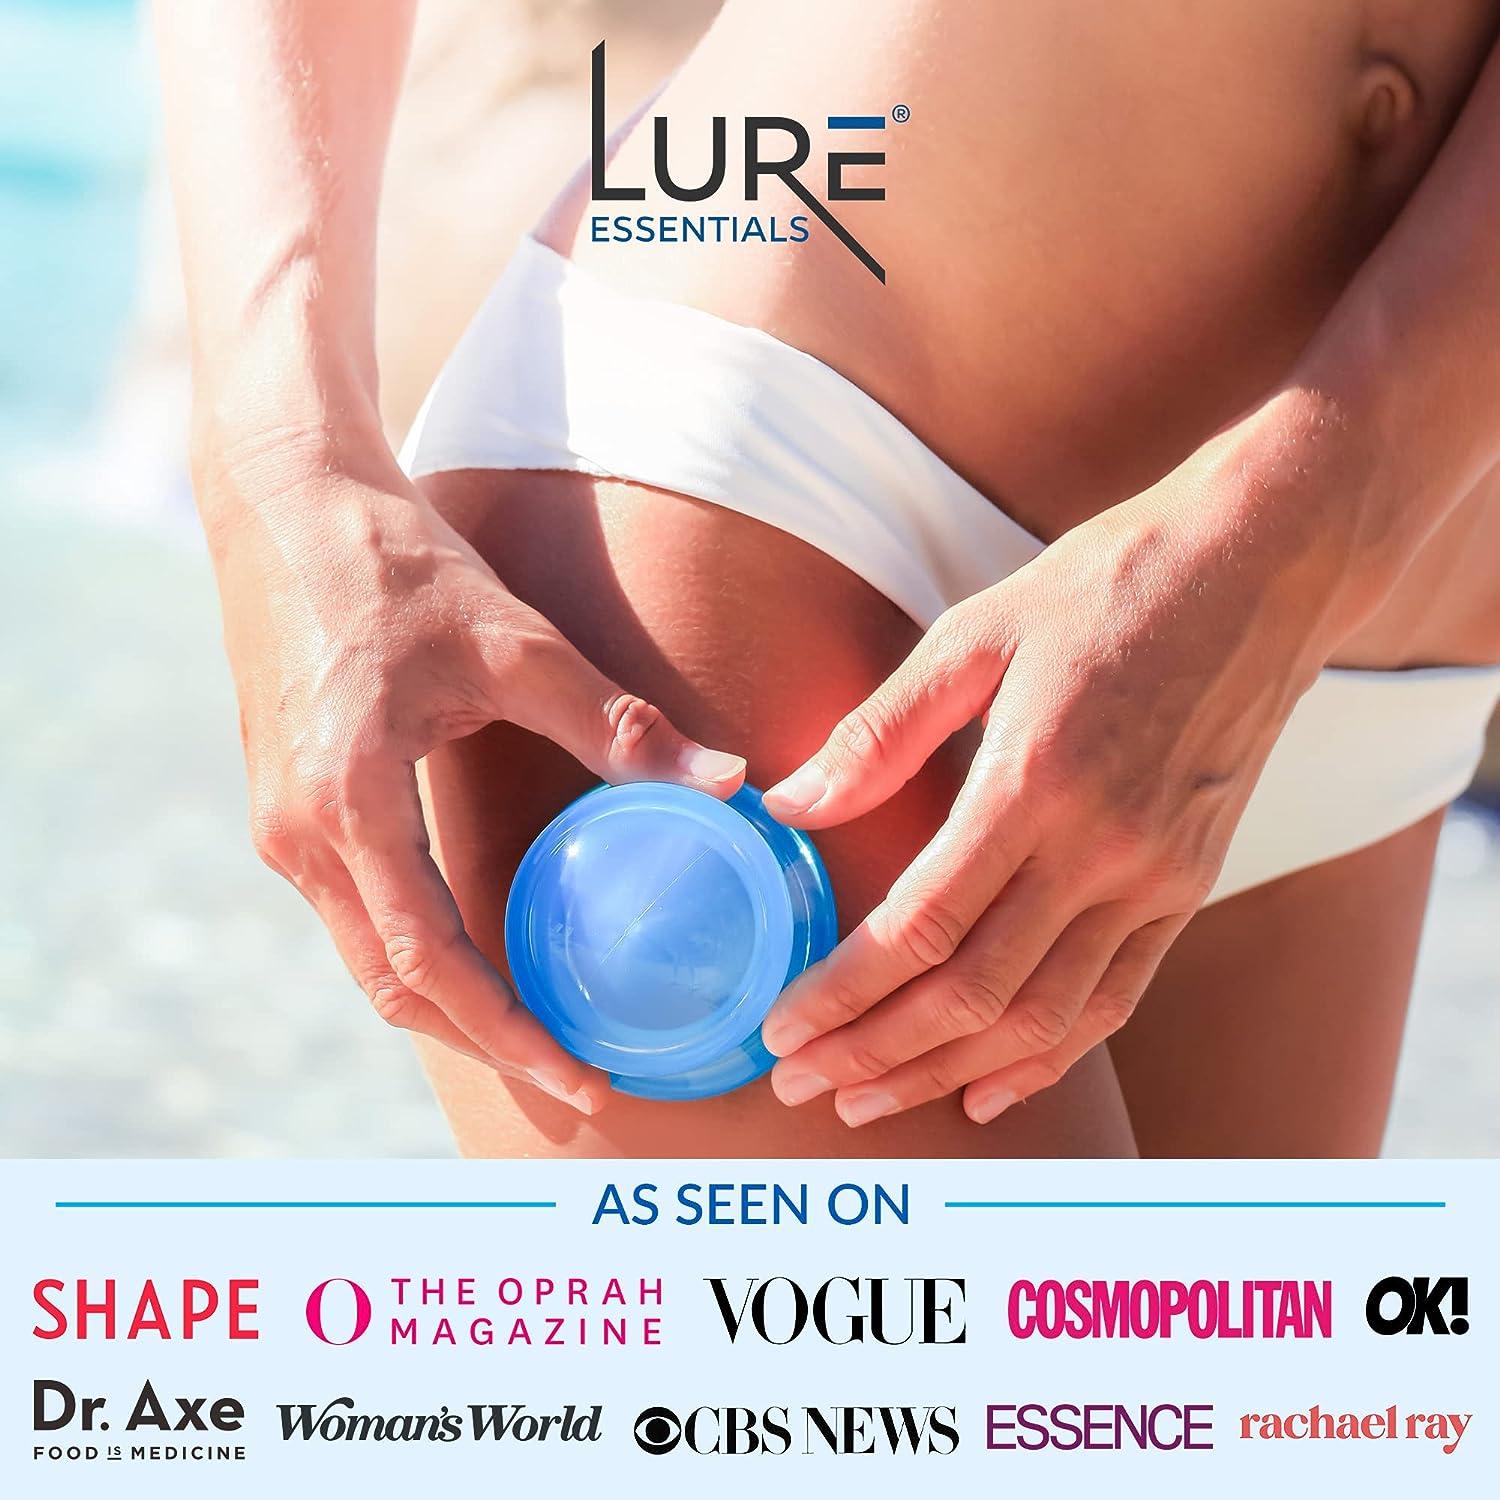 LURE Essentials Sculpt Cupping Set for Cellulite Lymphatic Drainage Anti  Cellulite Cup and Cellulite Massager 3 Count (Pack of 1)